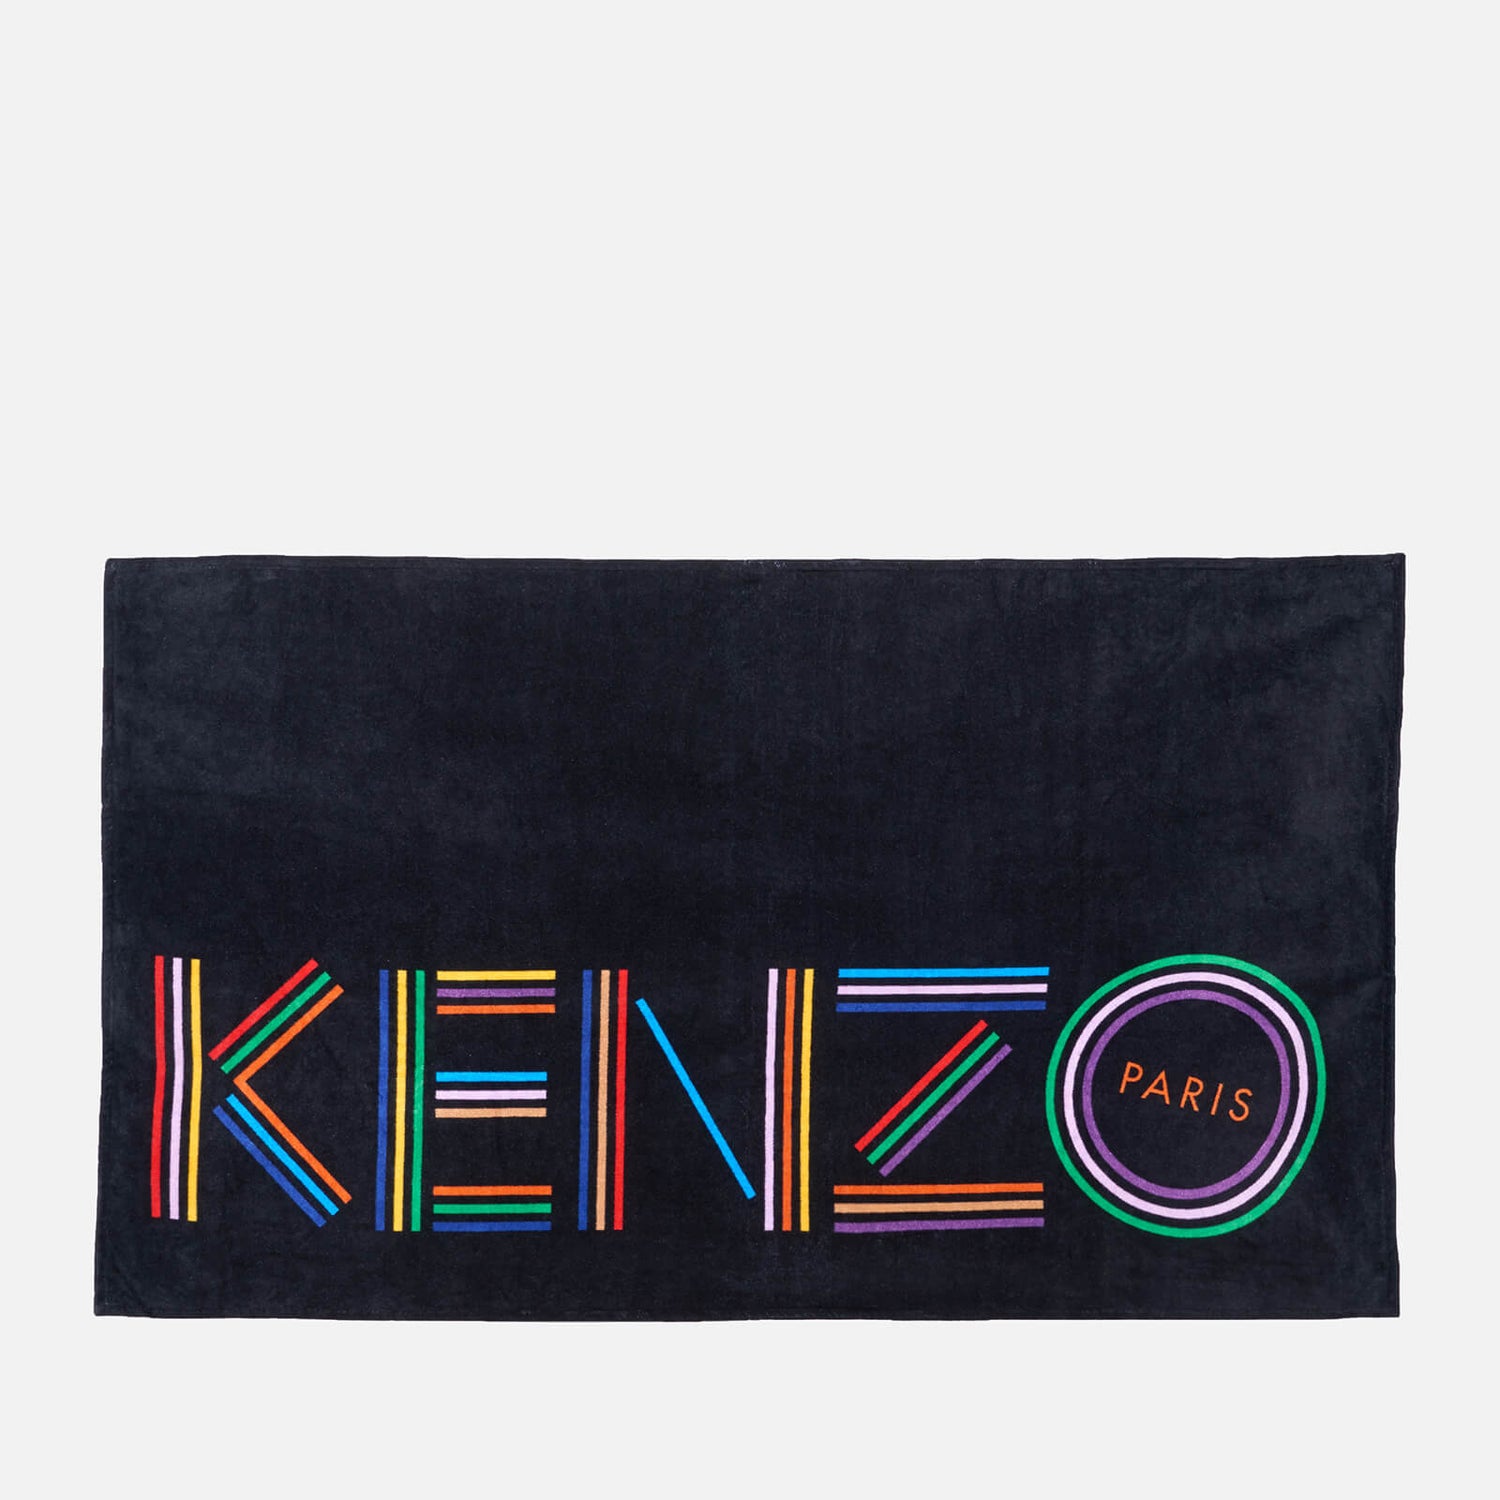 KENZO Men's Logo Beach Towel - Black - Free UK Delivery Available